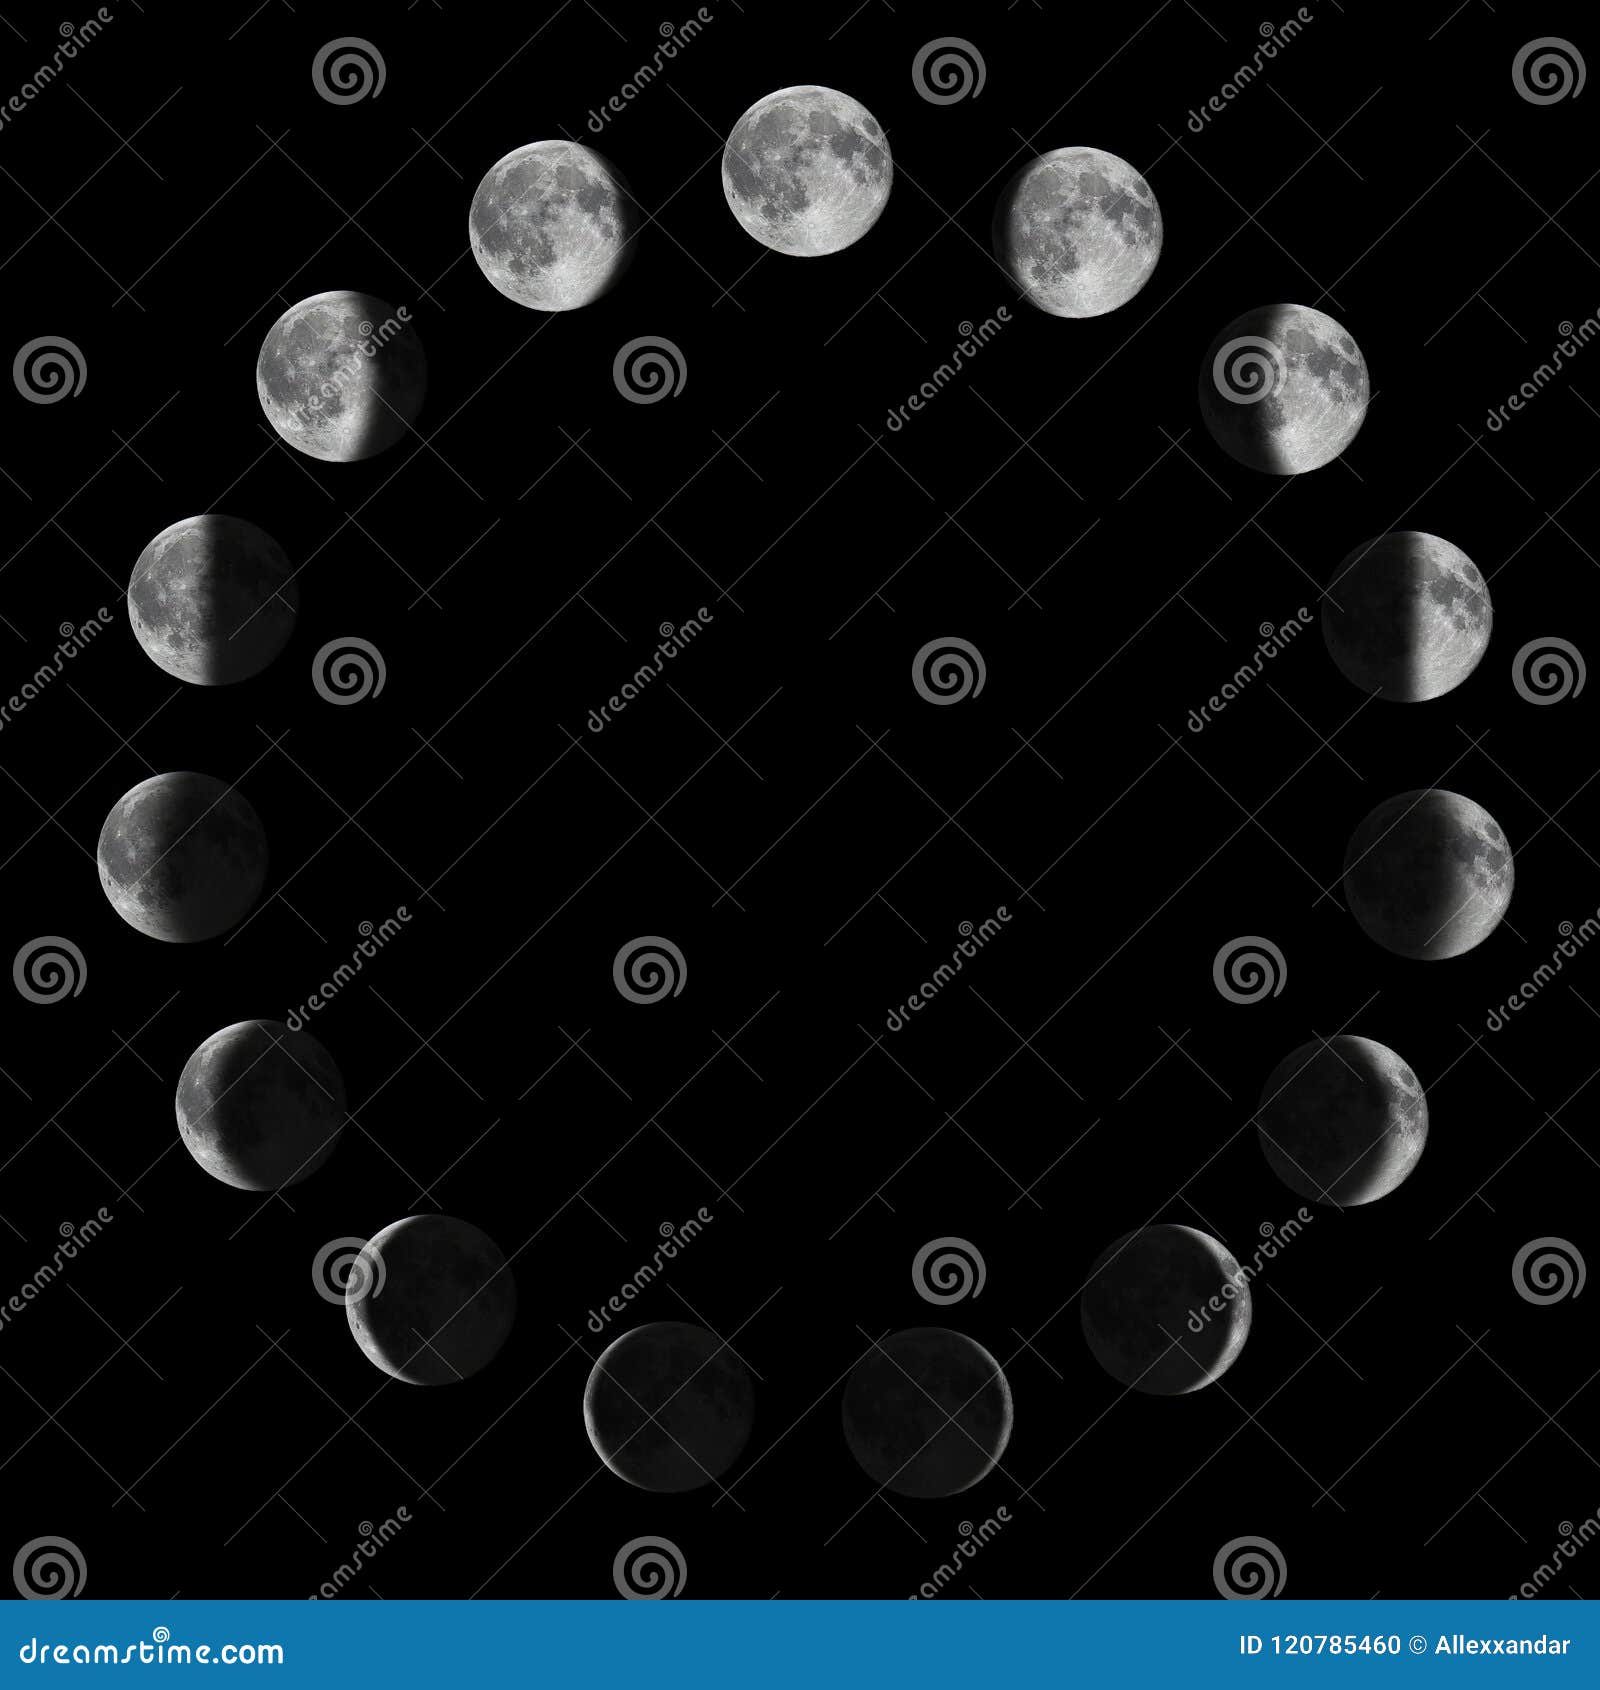 phases of the moon. moon lunar cycle.